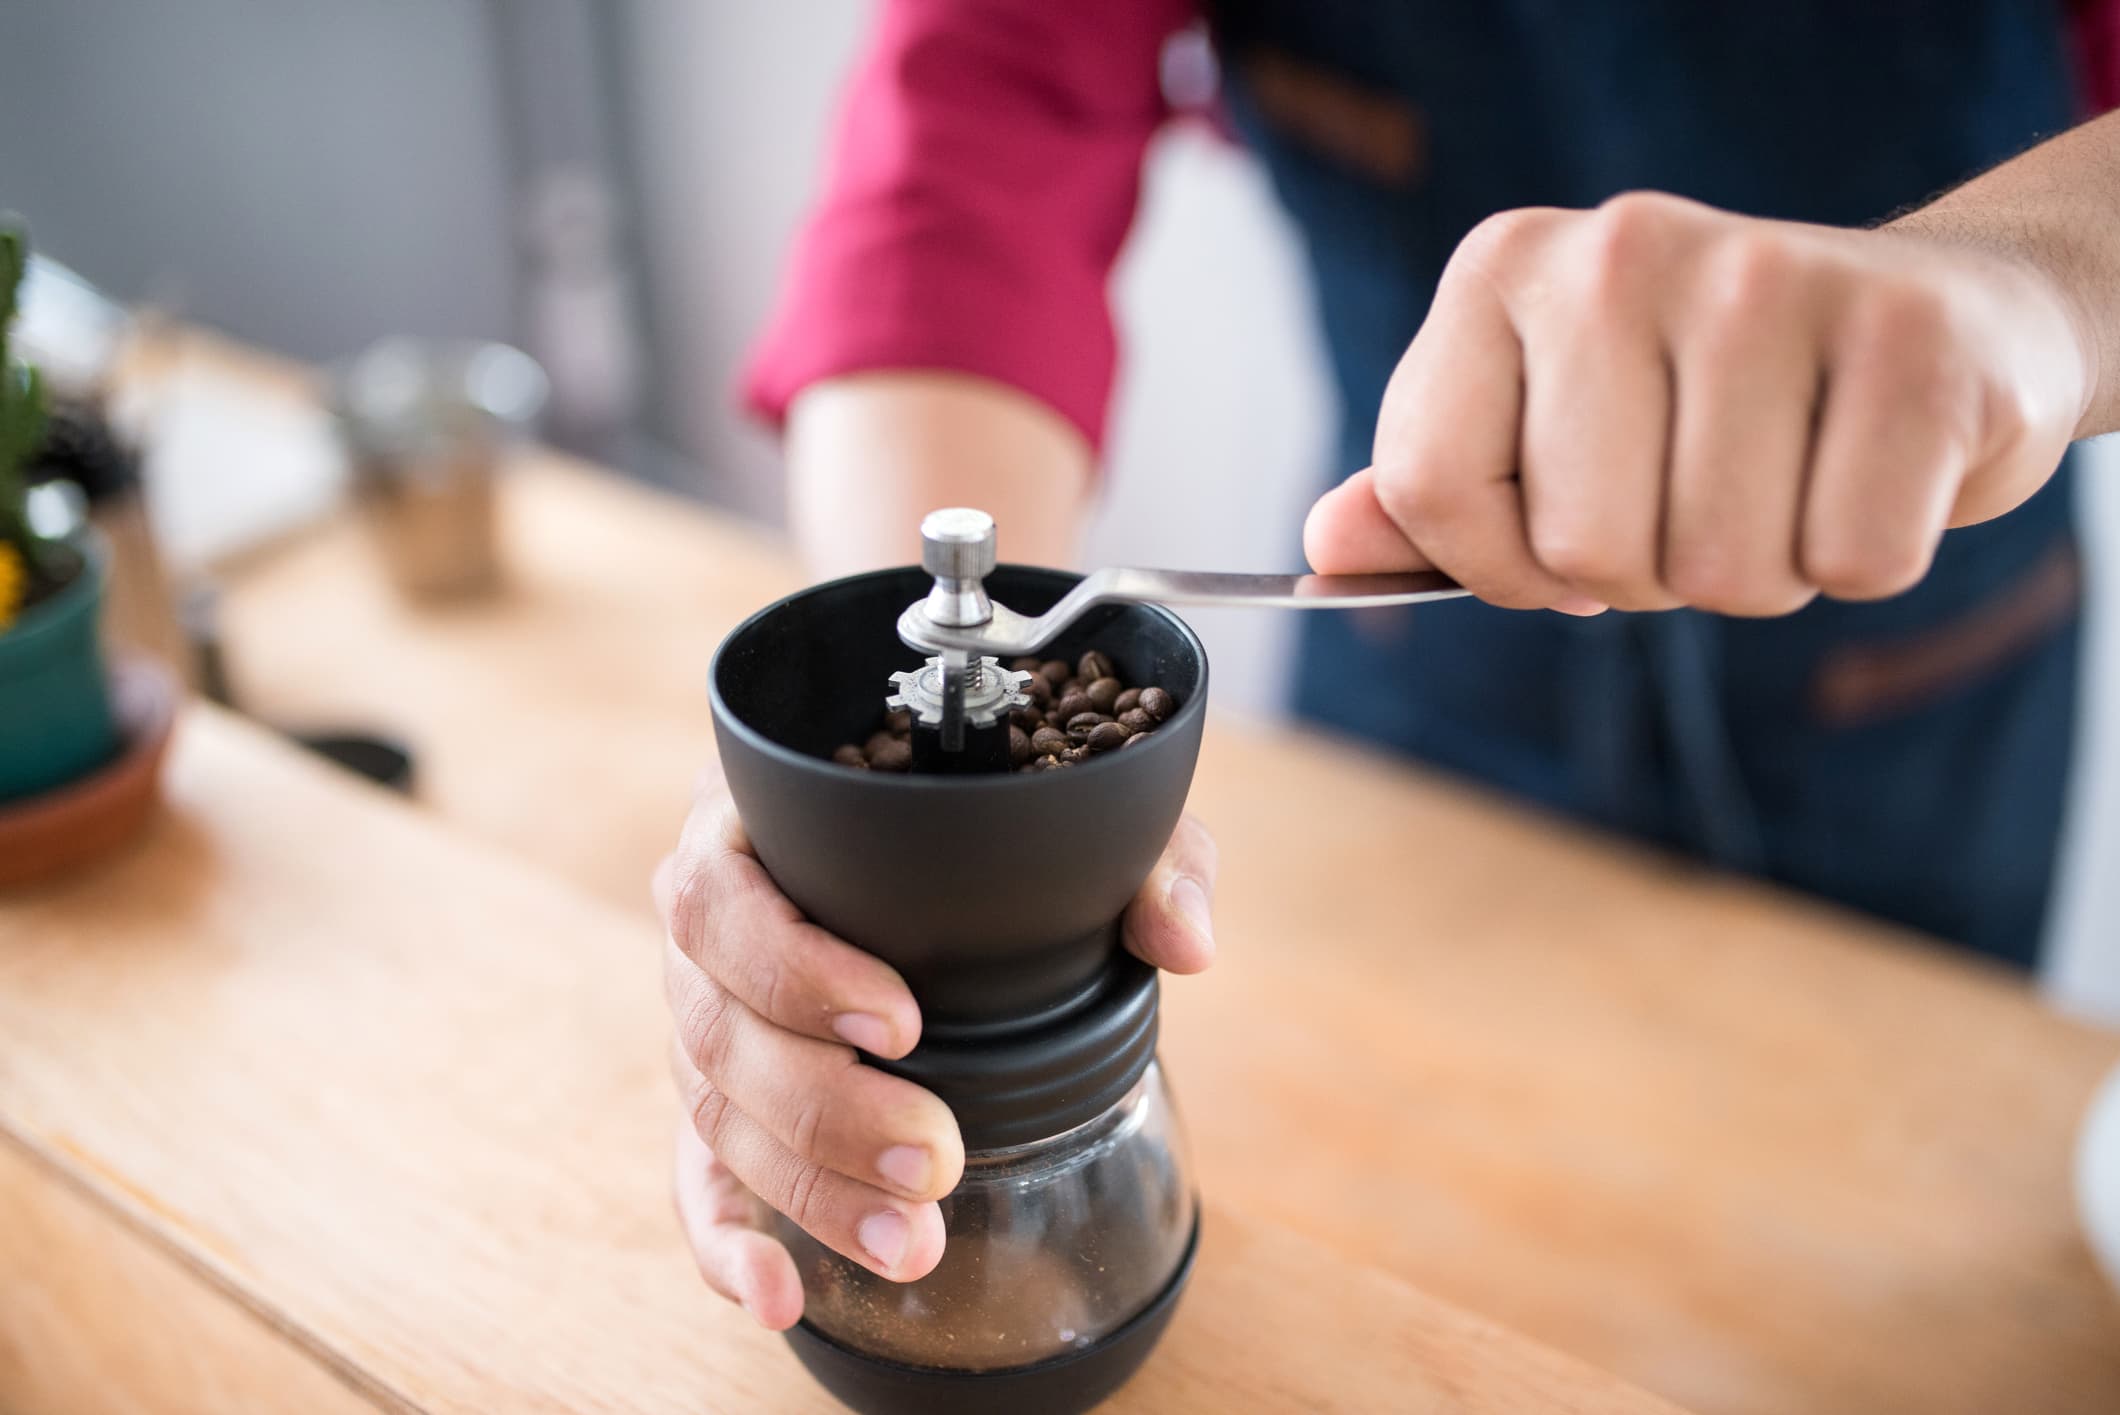 The 10 Best Coffee Grinders You Can Buy